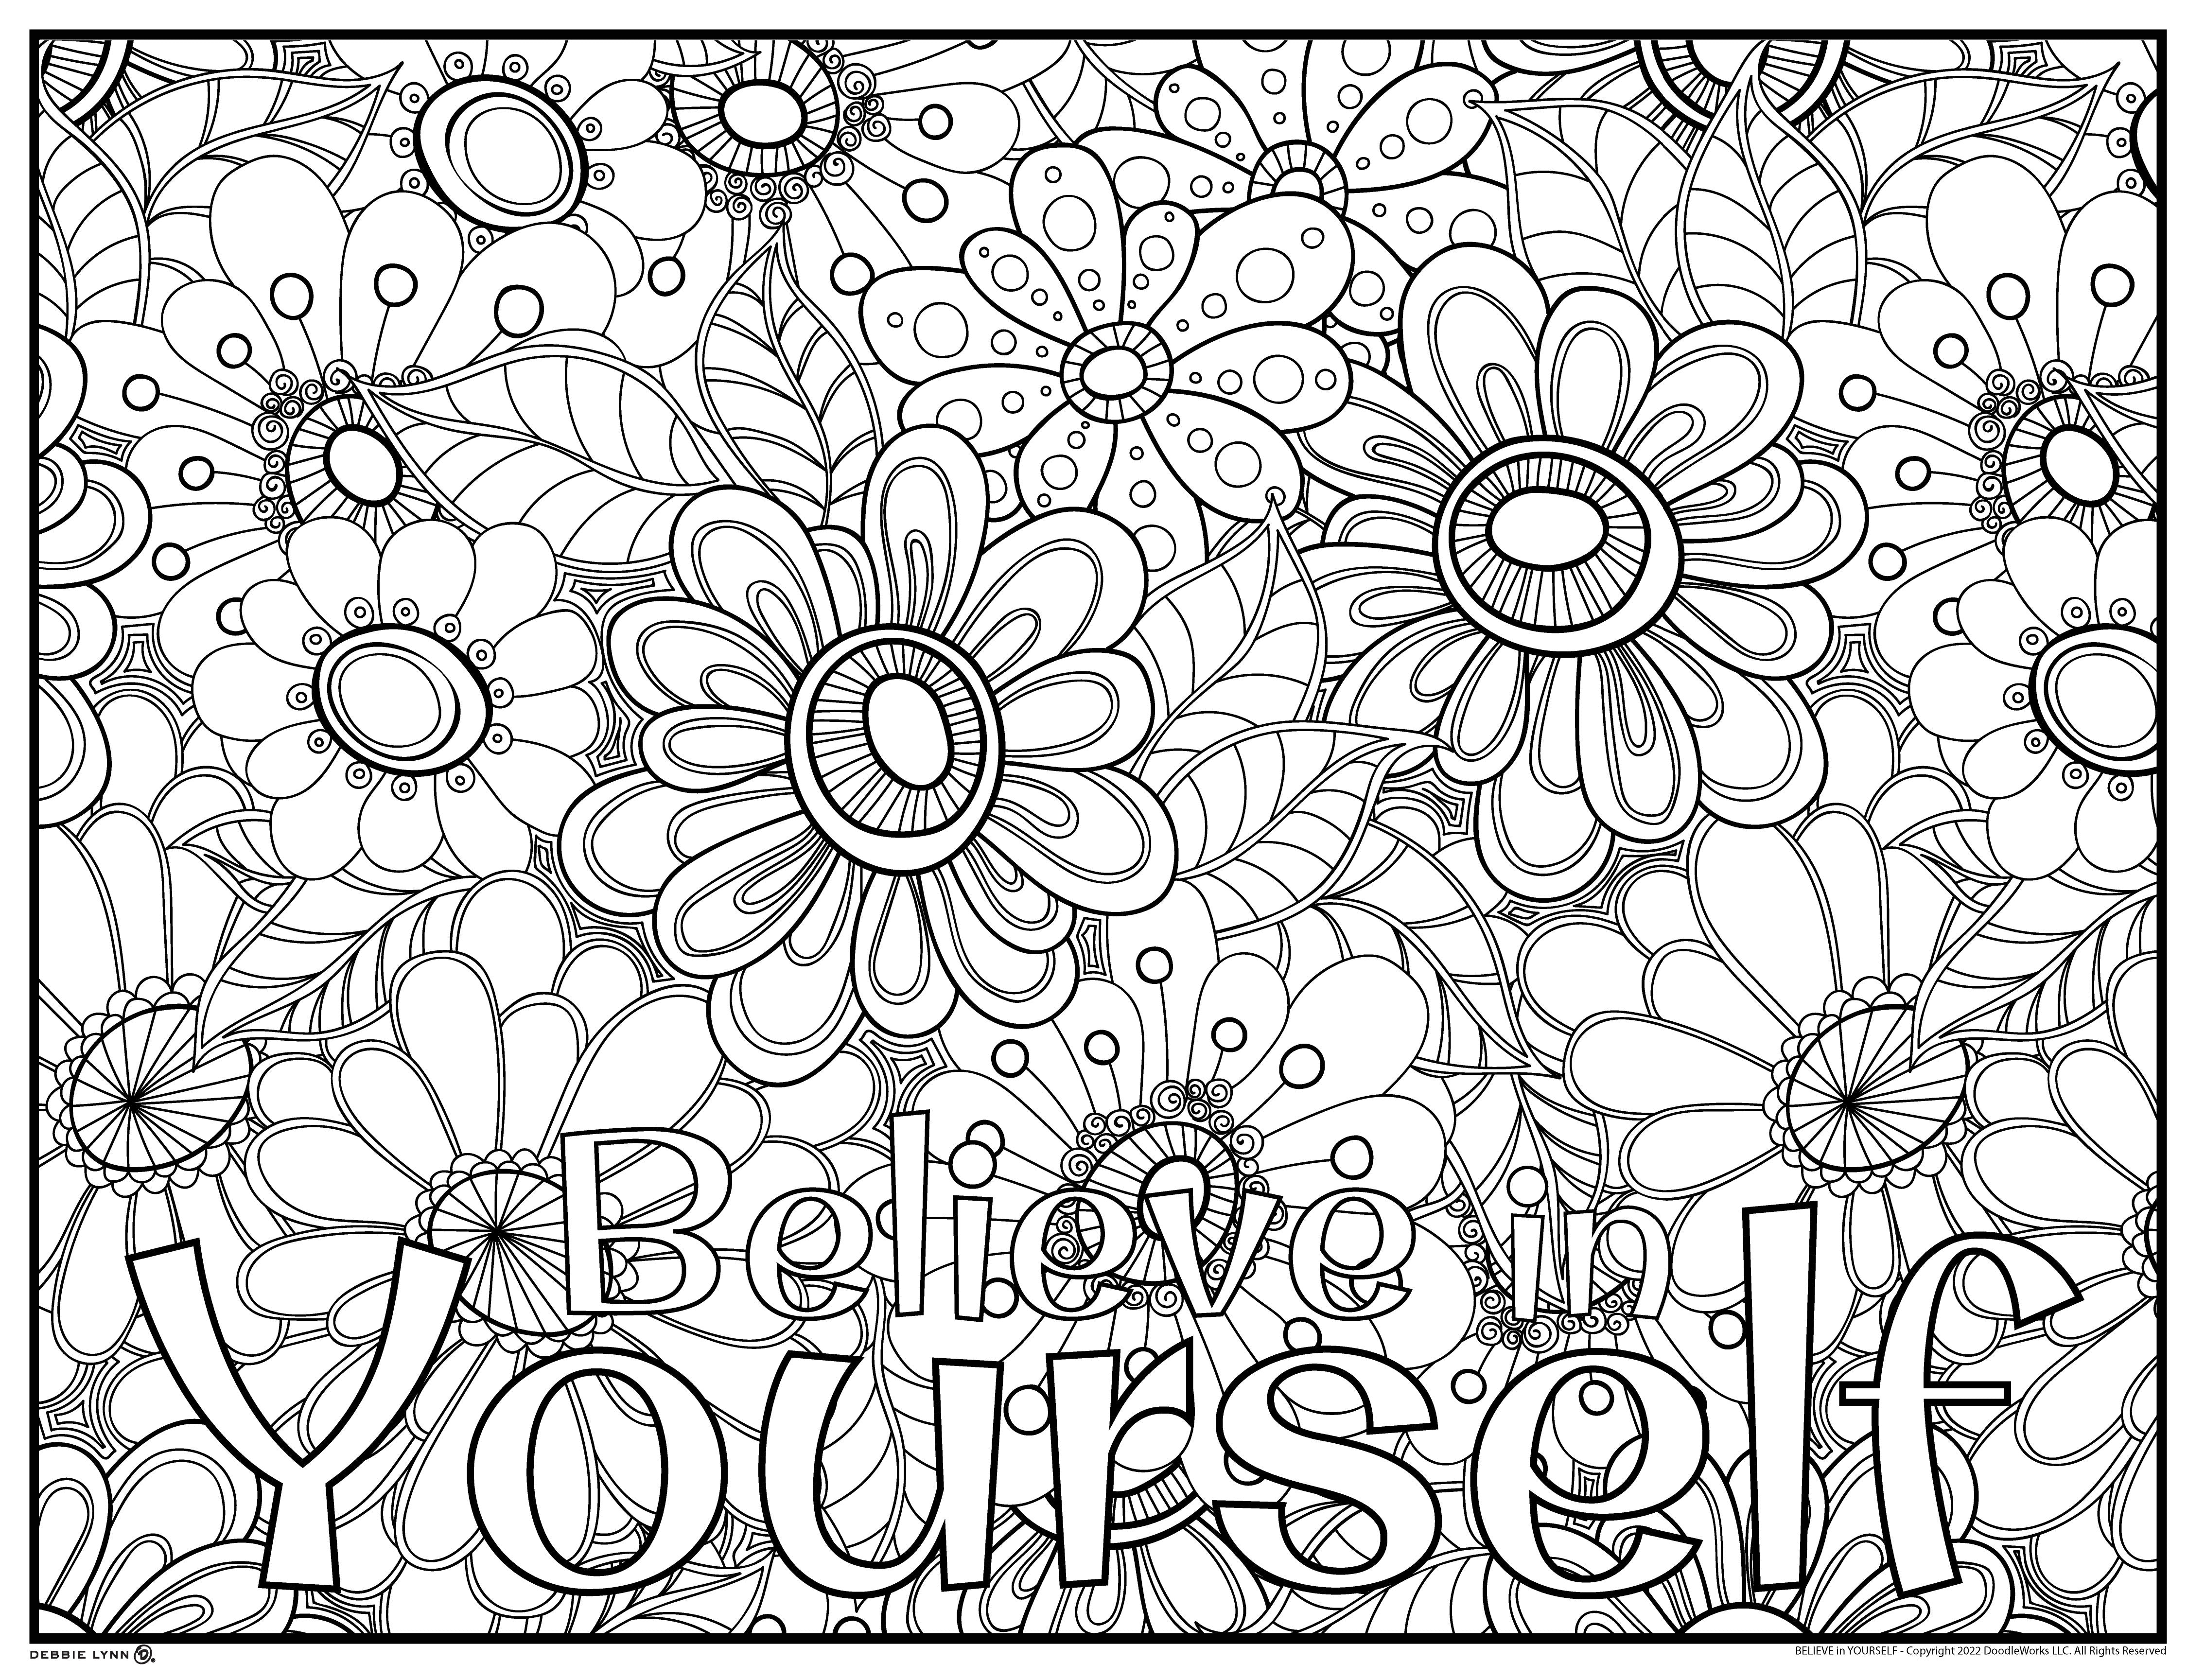 INSPIRATIONAL QUOTES COLORING POSTERS SUPER HUGE 48